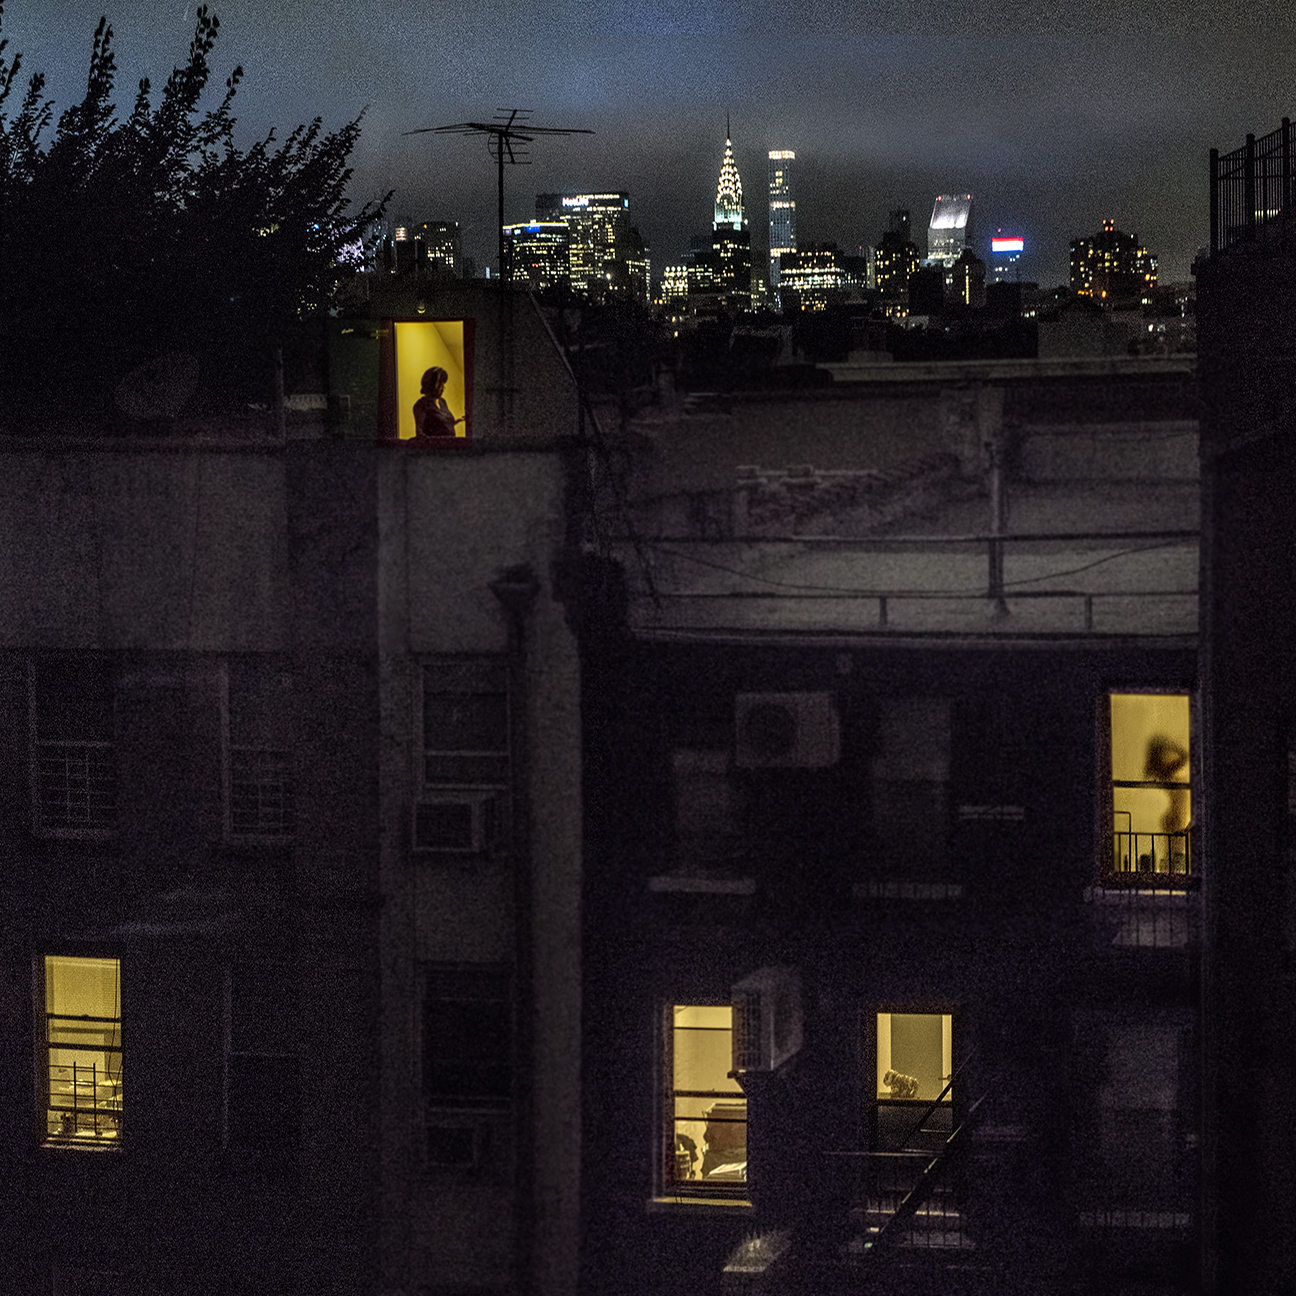 Rearview of Sally Davies' apartment on East 5th Street at night with illuminated windows.